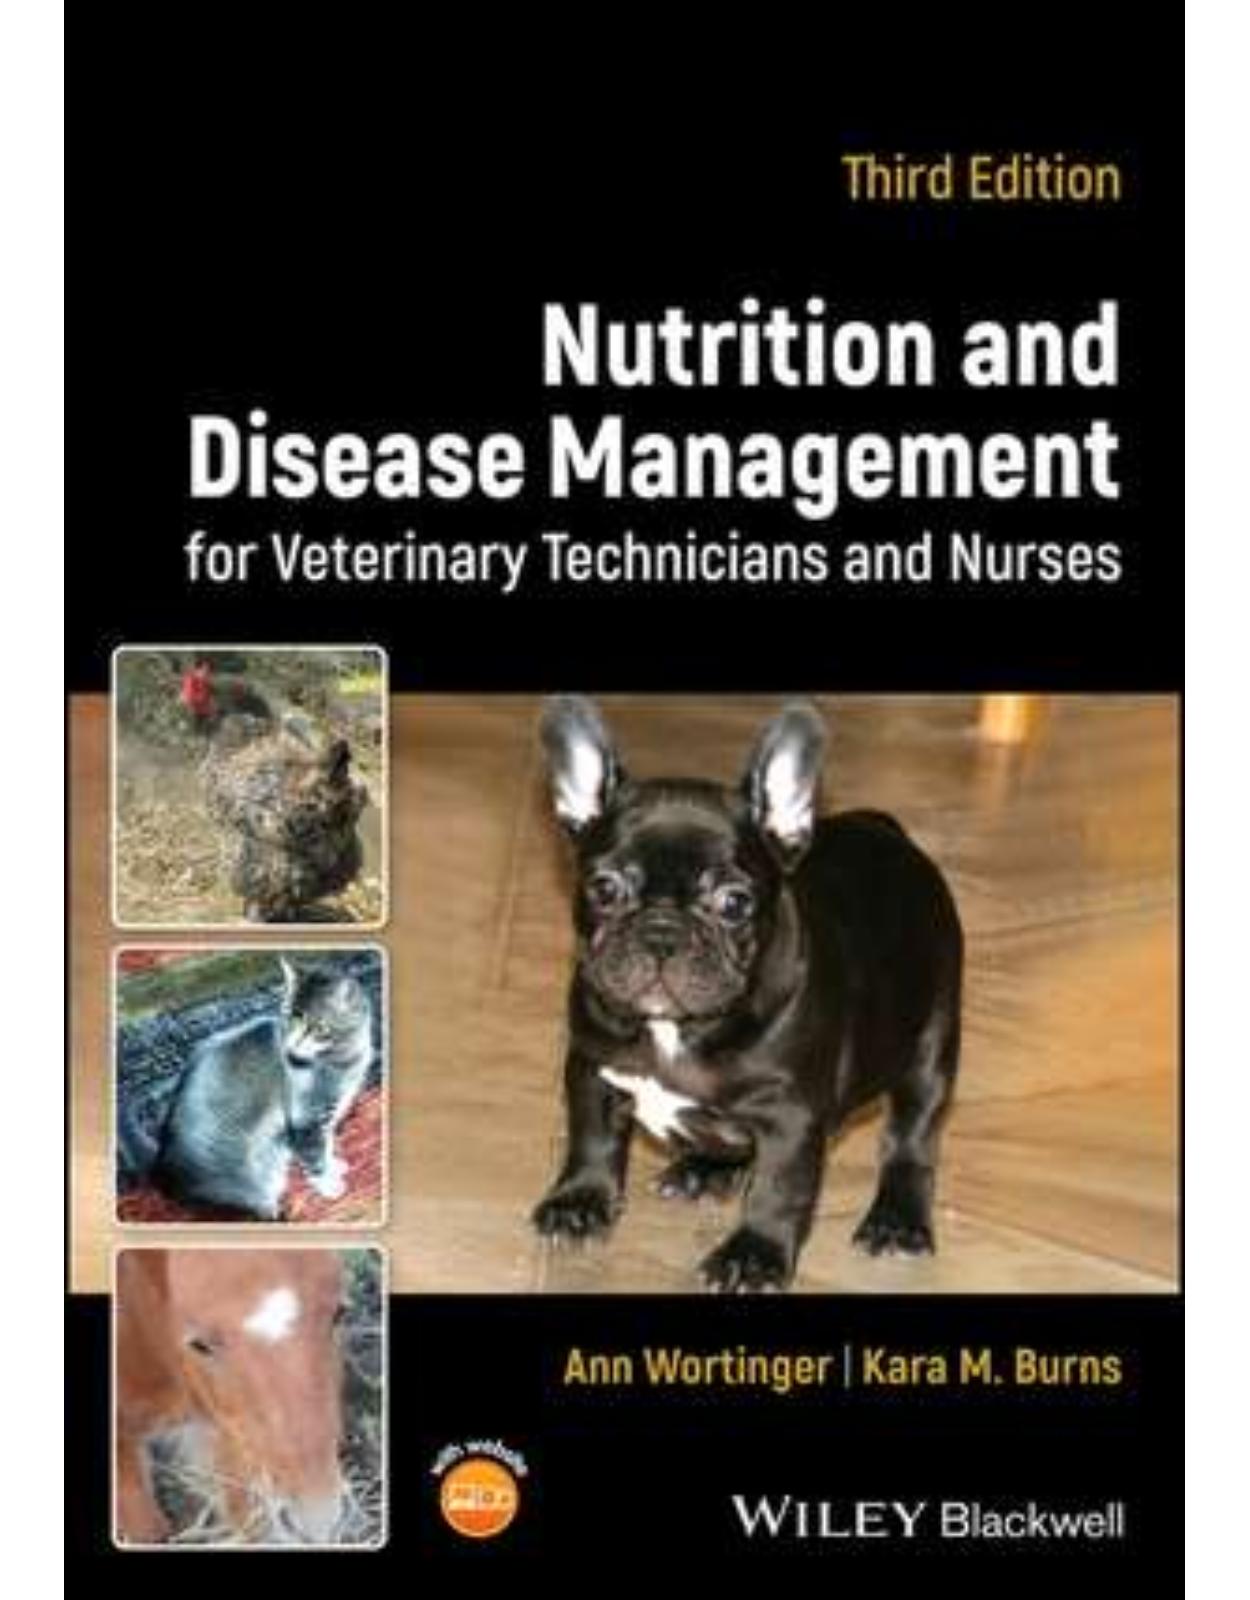 Nutrition and Disease Management for Veterinary Technicians and Nurses, 3rd Edition